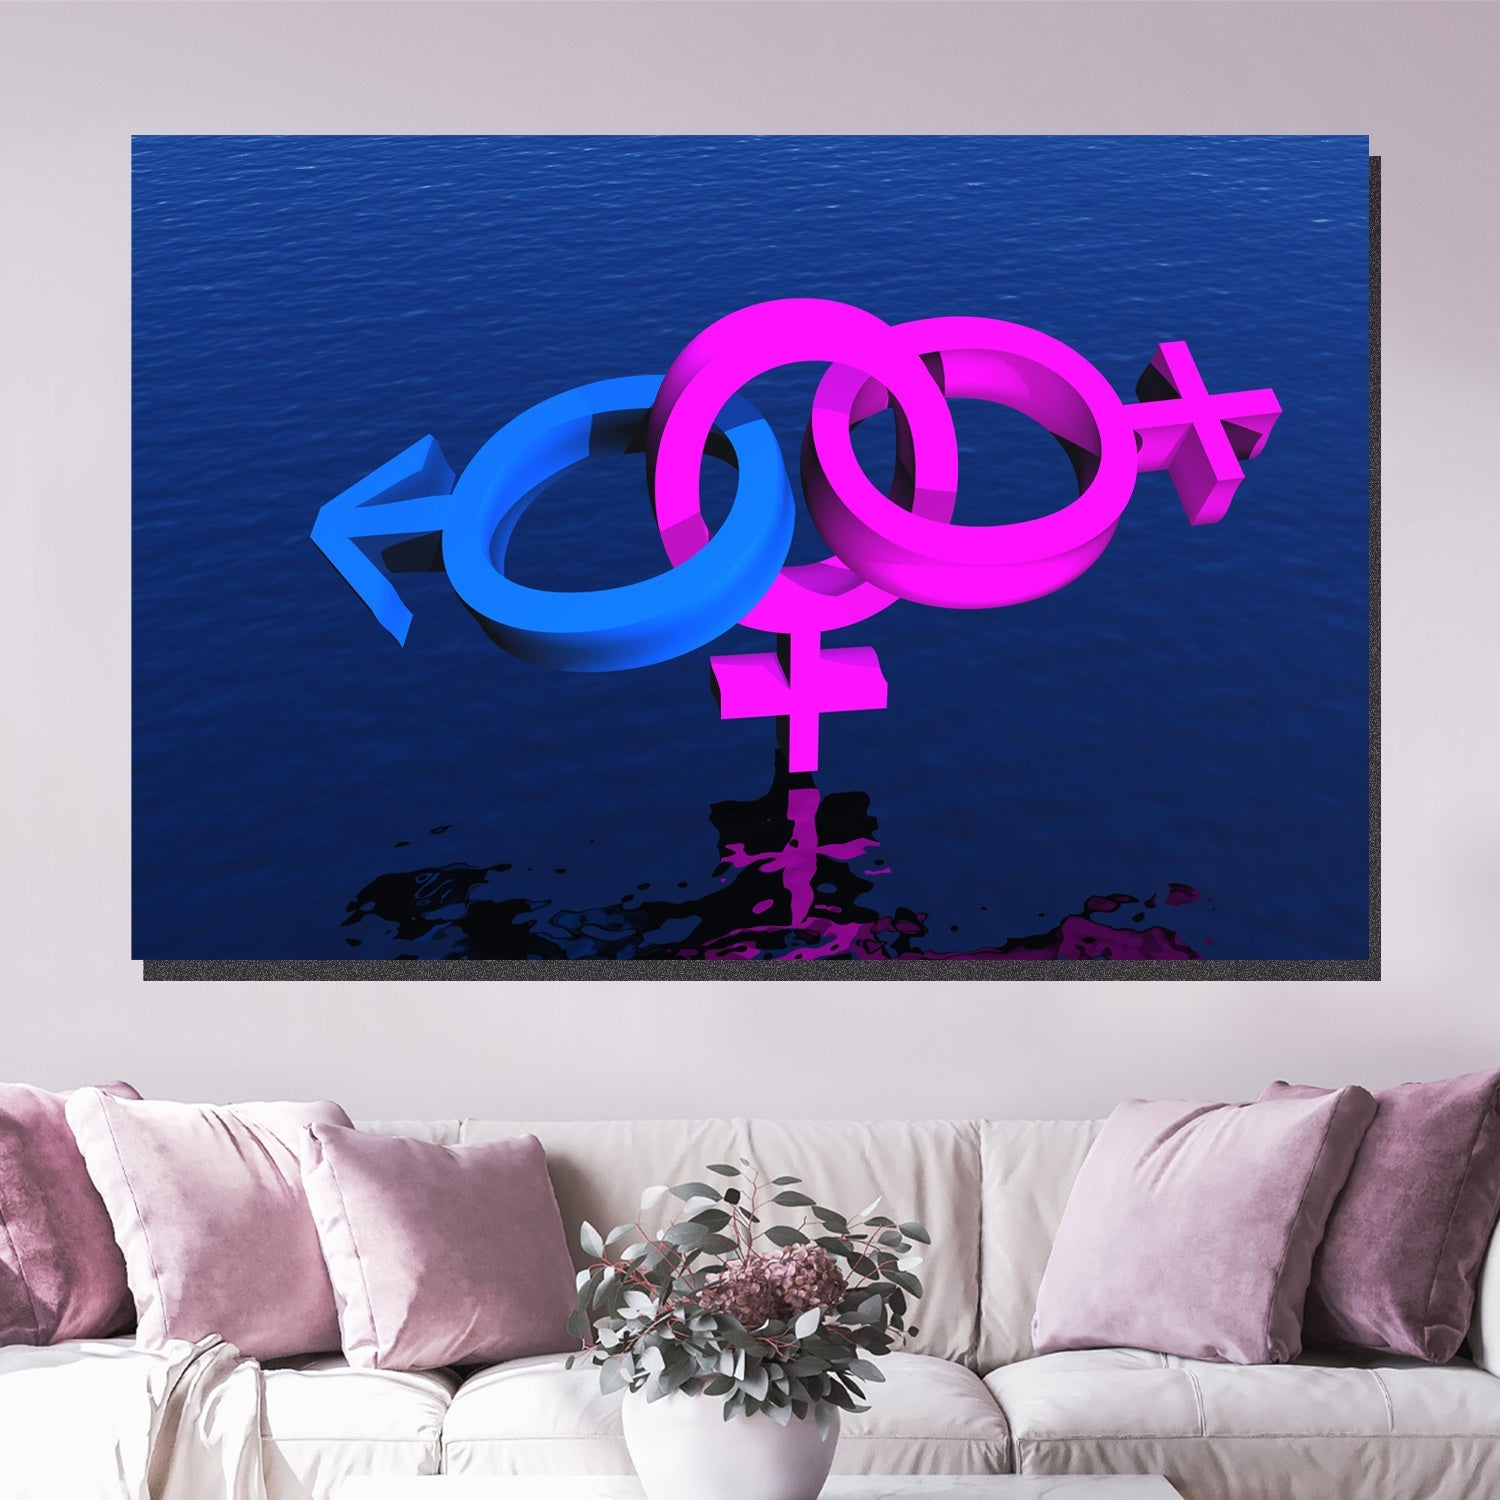 https://cdn.shopify.com/s/files/1/0387/9986/8044/products/BisexualWomanSymbolCanvasArtprintStretched-4.jpg